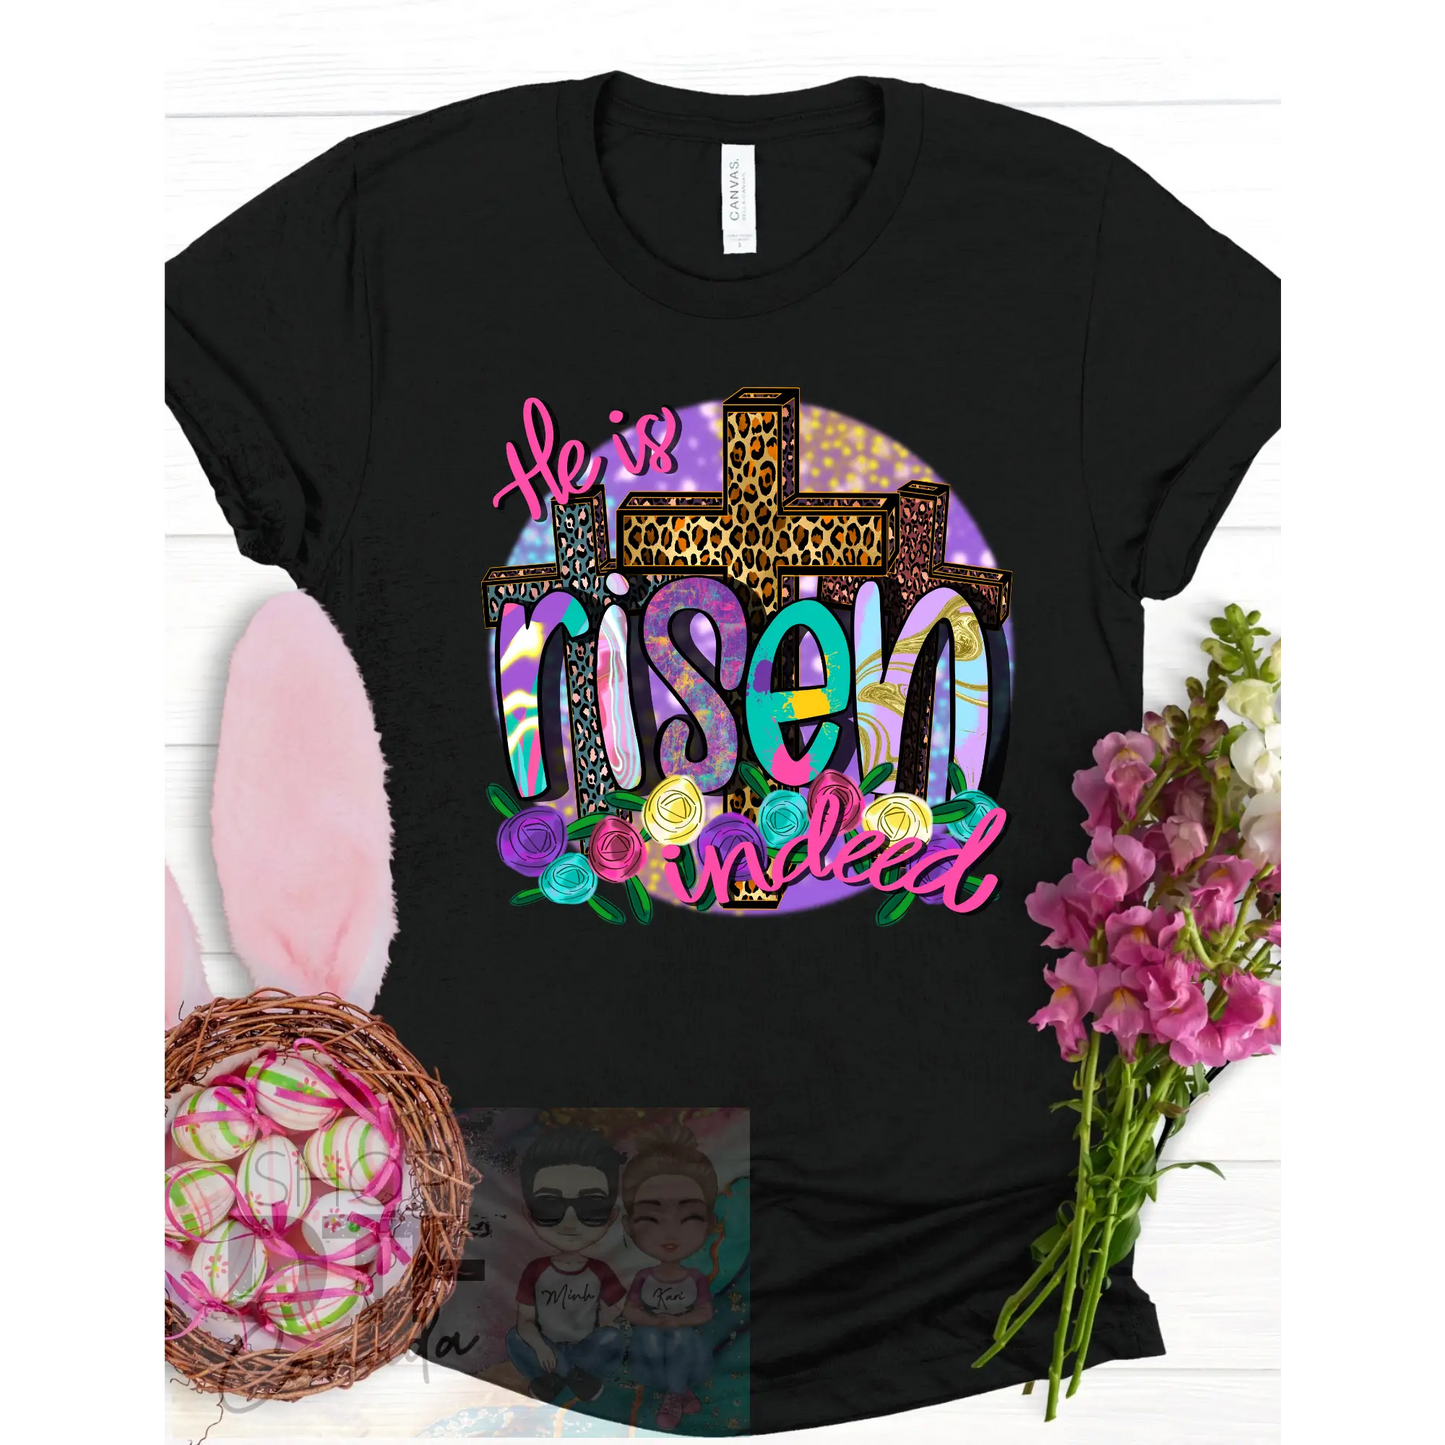 Easter - He has risen indeed - Shirts & Tops